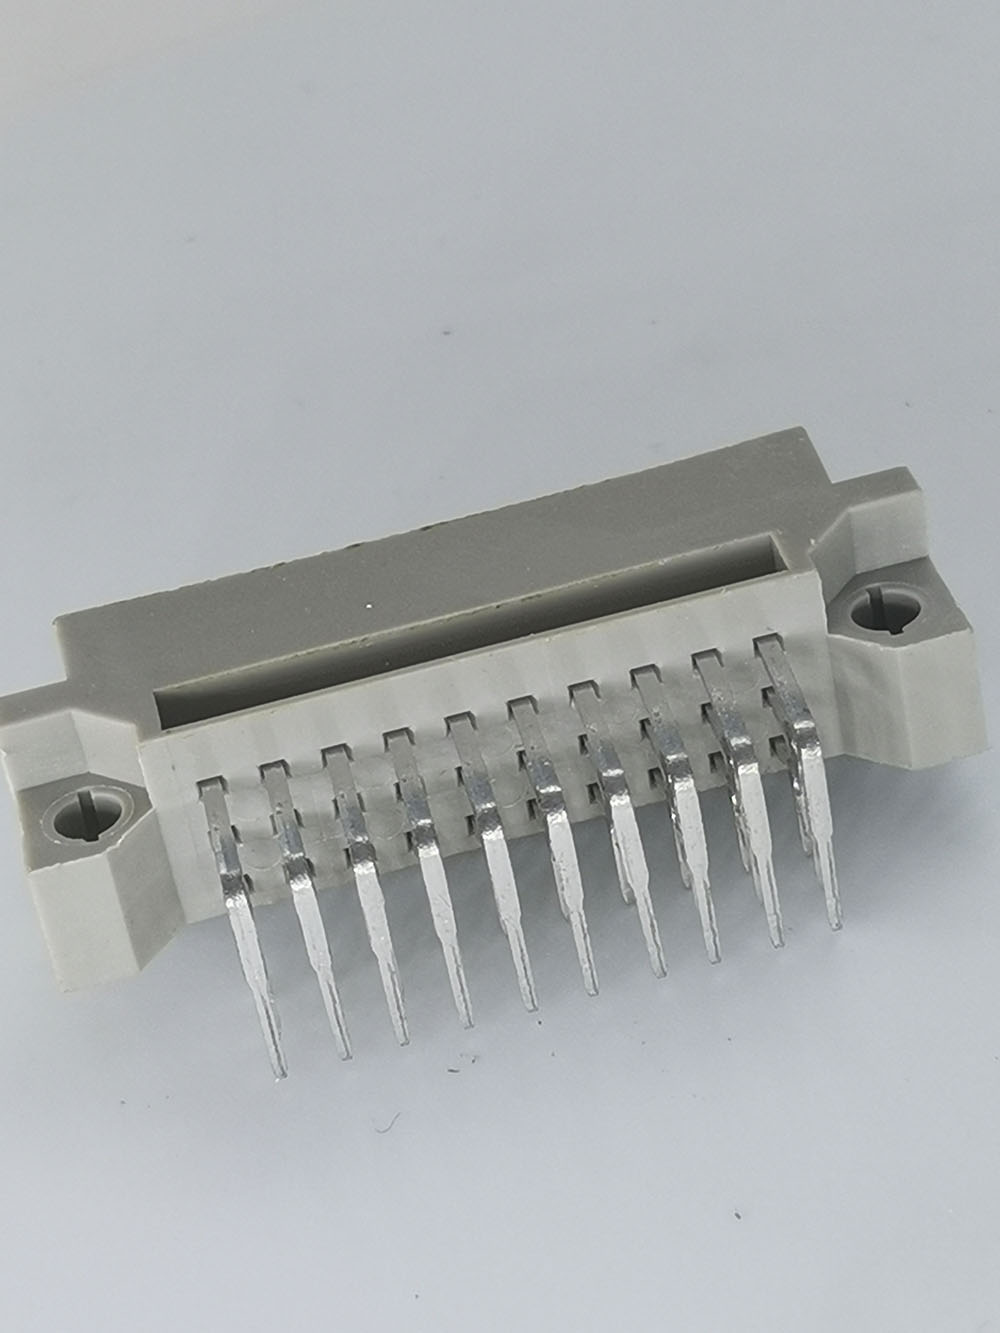 30 Pin Type 1/3C Male DIN41612 Connector